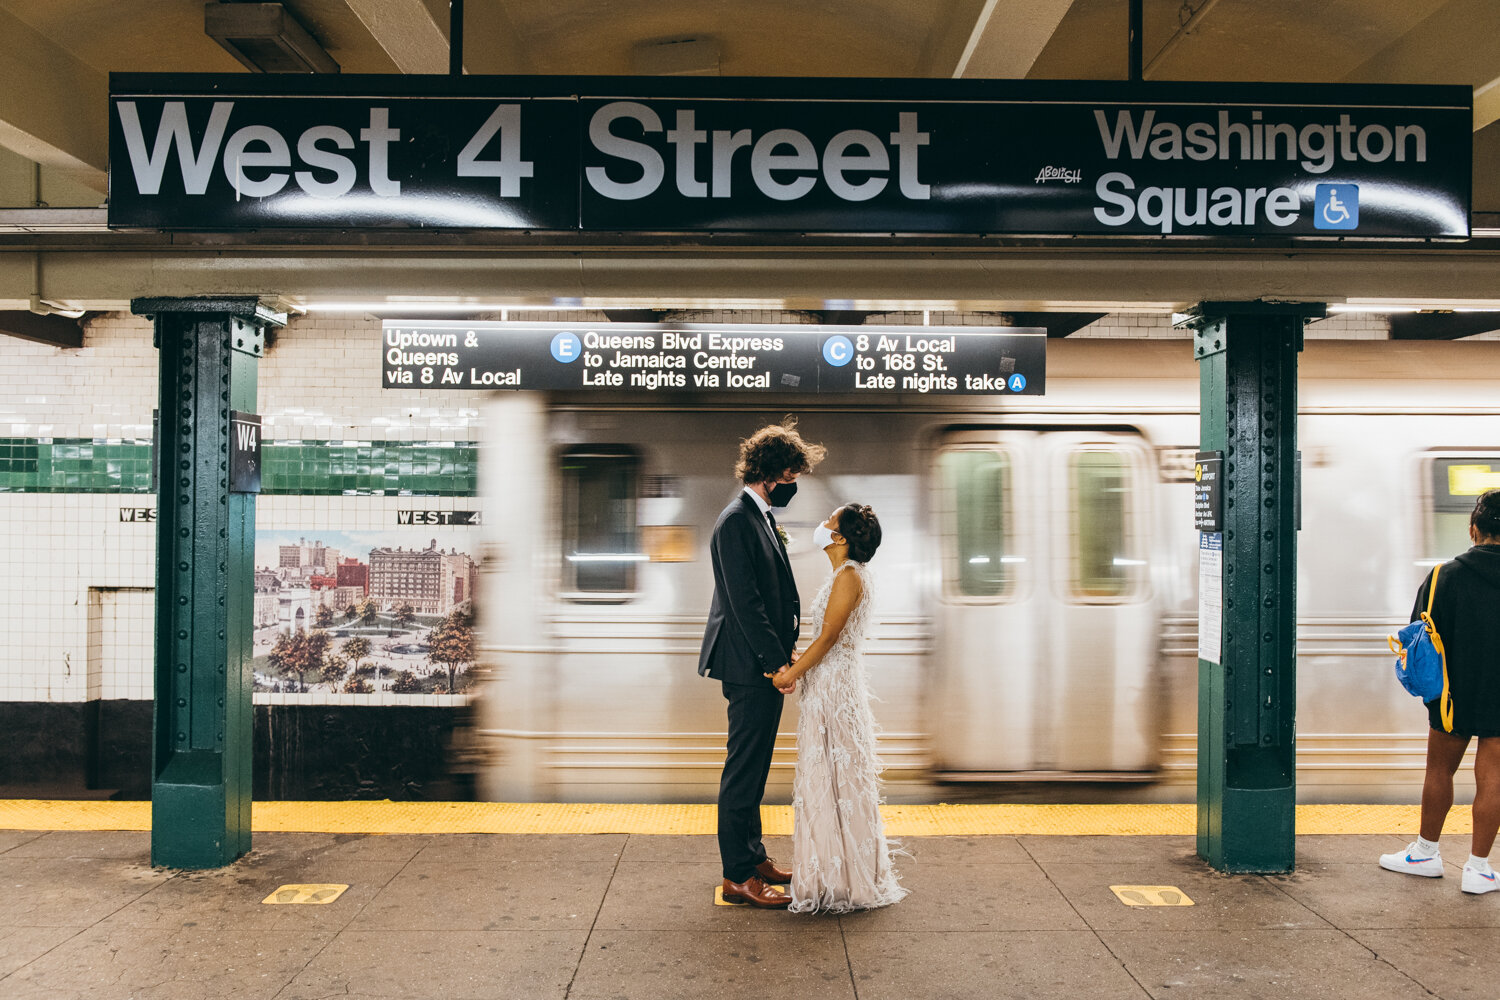 Bride and groom stand facing each other, holding hands, and looking into each other's eyes with masks on in the subway station. The subway is moving behind them and they are below a sign that says "West 4th Street"

Central Park Wedding Photography. Williamsburg Bridge Bridal Portraits. Luxury NYC Wedding Photographer. Manhattan Micro Wedding.